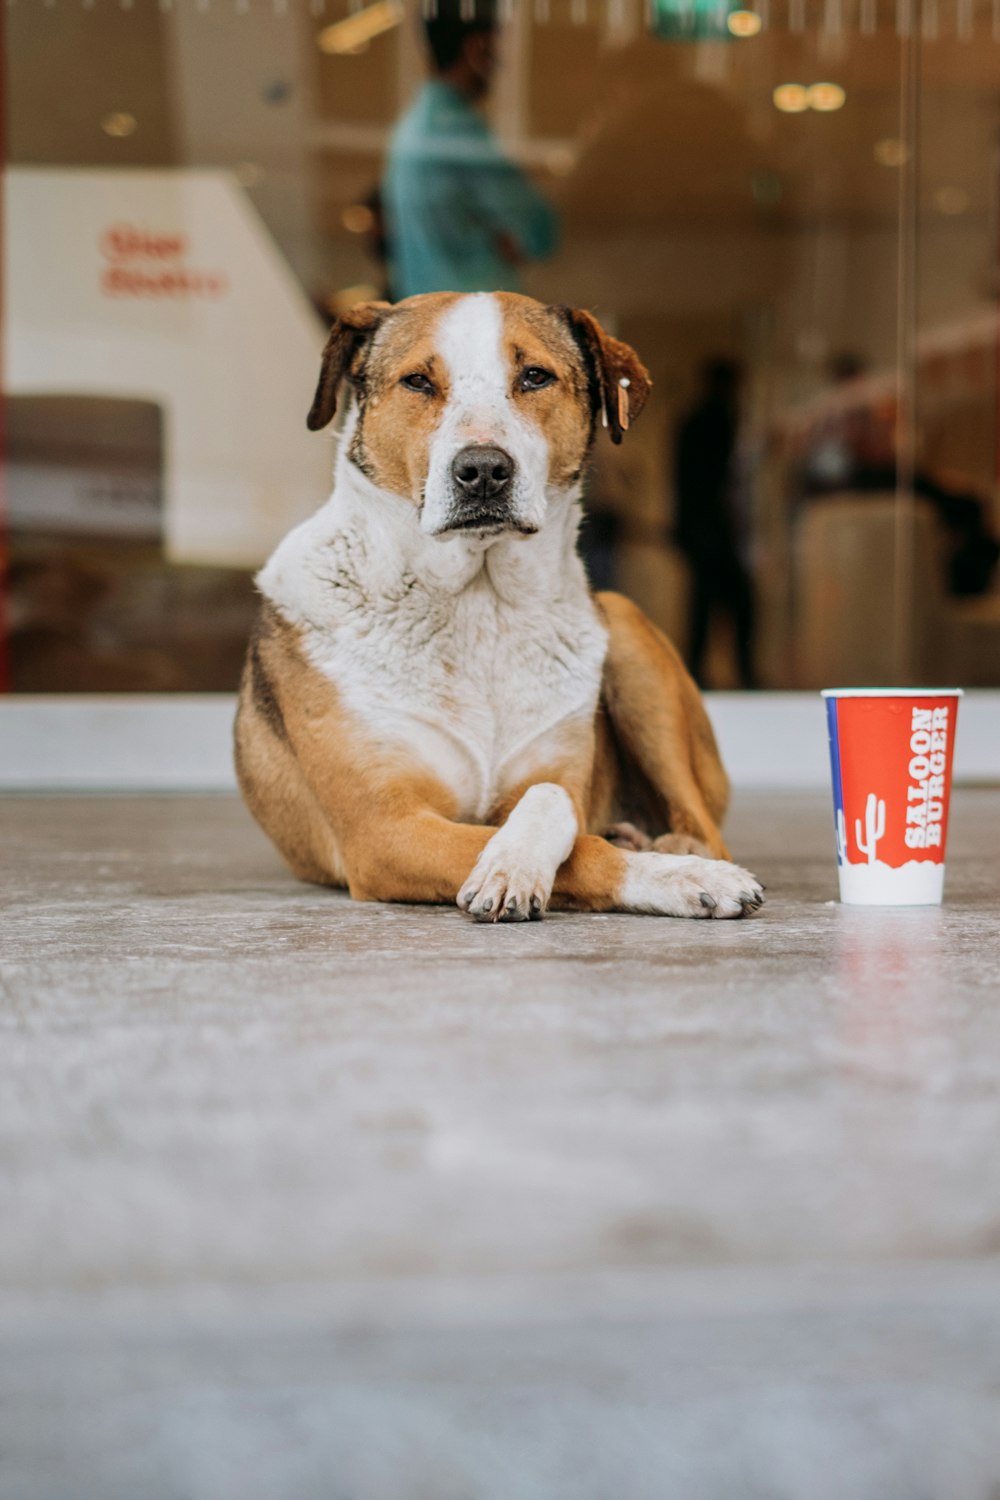 a brown and white dog sitting next to a cup of coffee